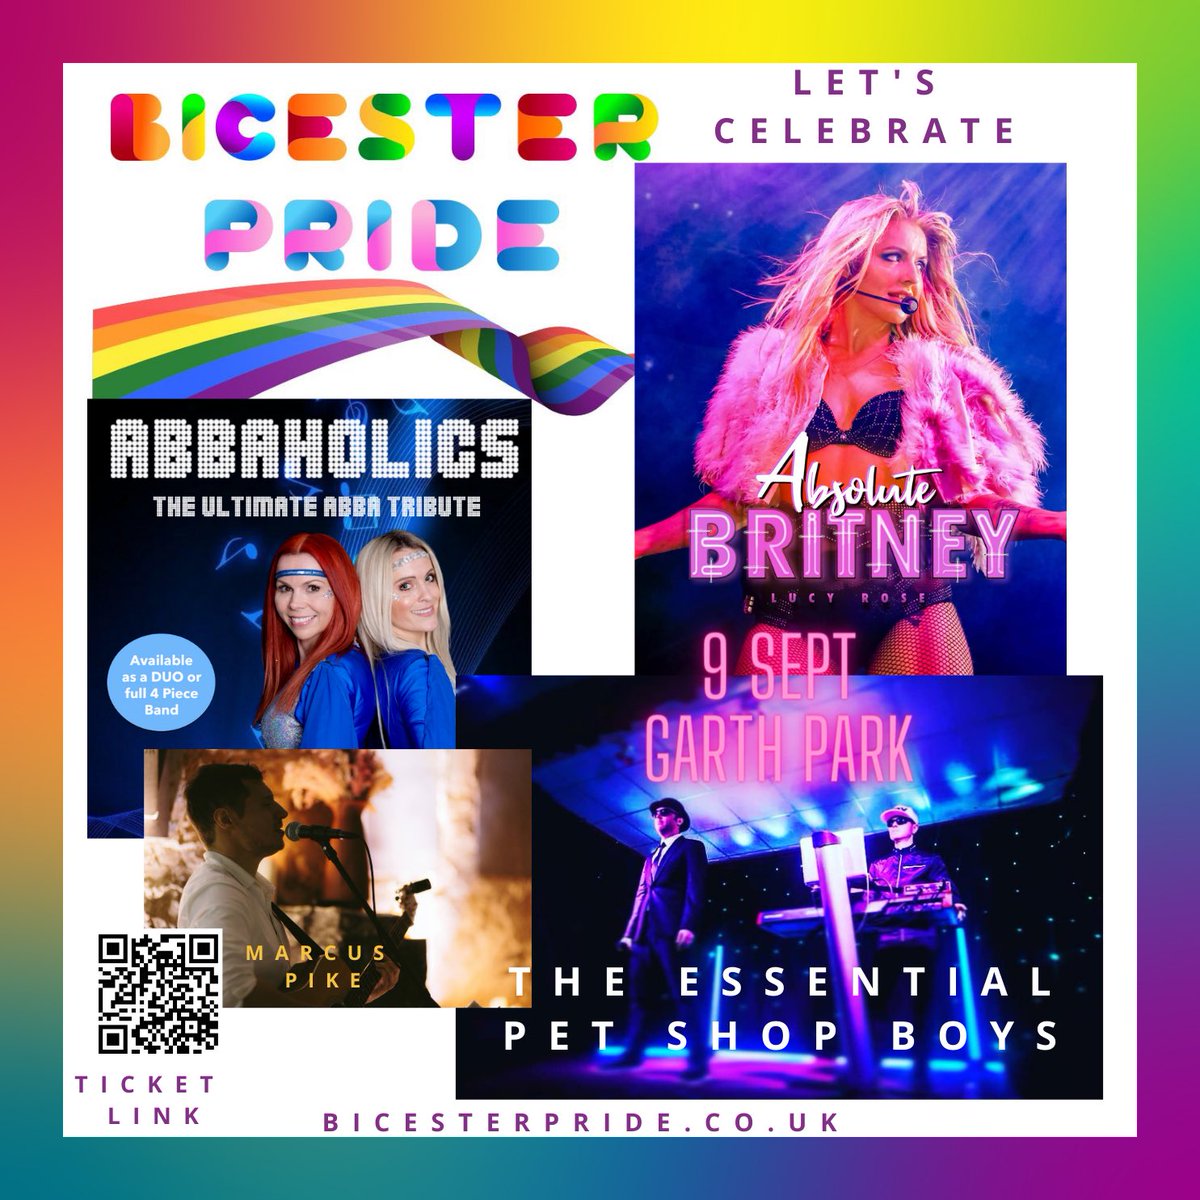 ITS A SIN , don’t forget to get your early bird tickets!!! Hit me baby one more time , Dancing Queens !!! 🏳️‍🌈🏳️‍🌈🏳️‍🌈🏳️‍🌈🏳️‍🌈🏳️‍🌈🏳️‍🌈🏳️‍🌈 Bicester Pride 2023 on 9 September 12pm to 10pm - GARTH PARK 🎉 tickets are on sale now Full line up 👇🏽BicesterPride.co.uk eventbrite.com/e/bicester-pri…